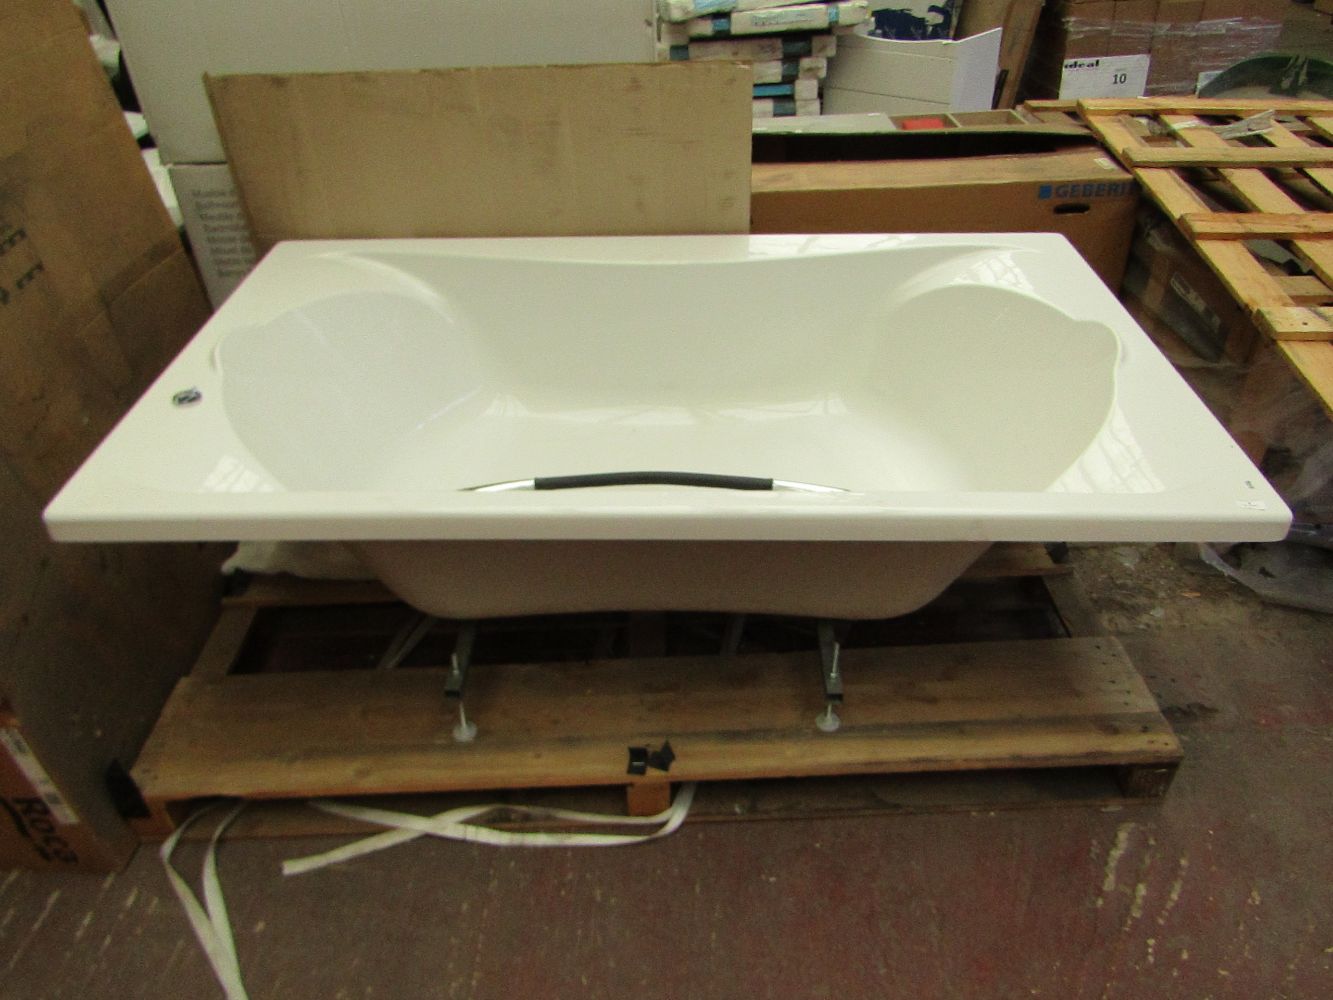 BRAND NEW BATHROOM AUCTION LOTS WITH LOW STARTING PRICES! Includes; a double ended bath, vanity units, luxury basins, towel radiators and more!